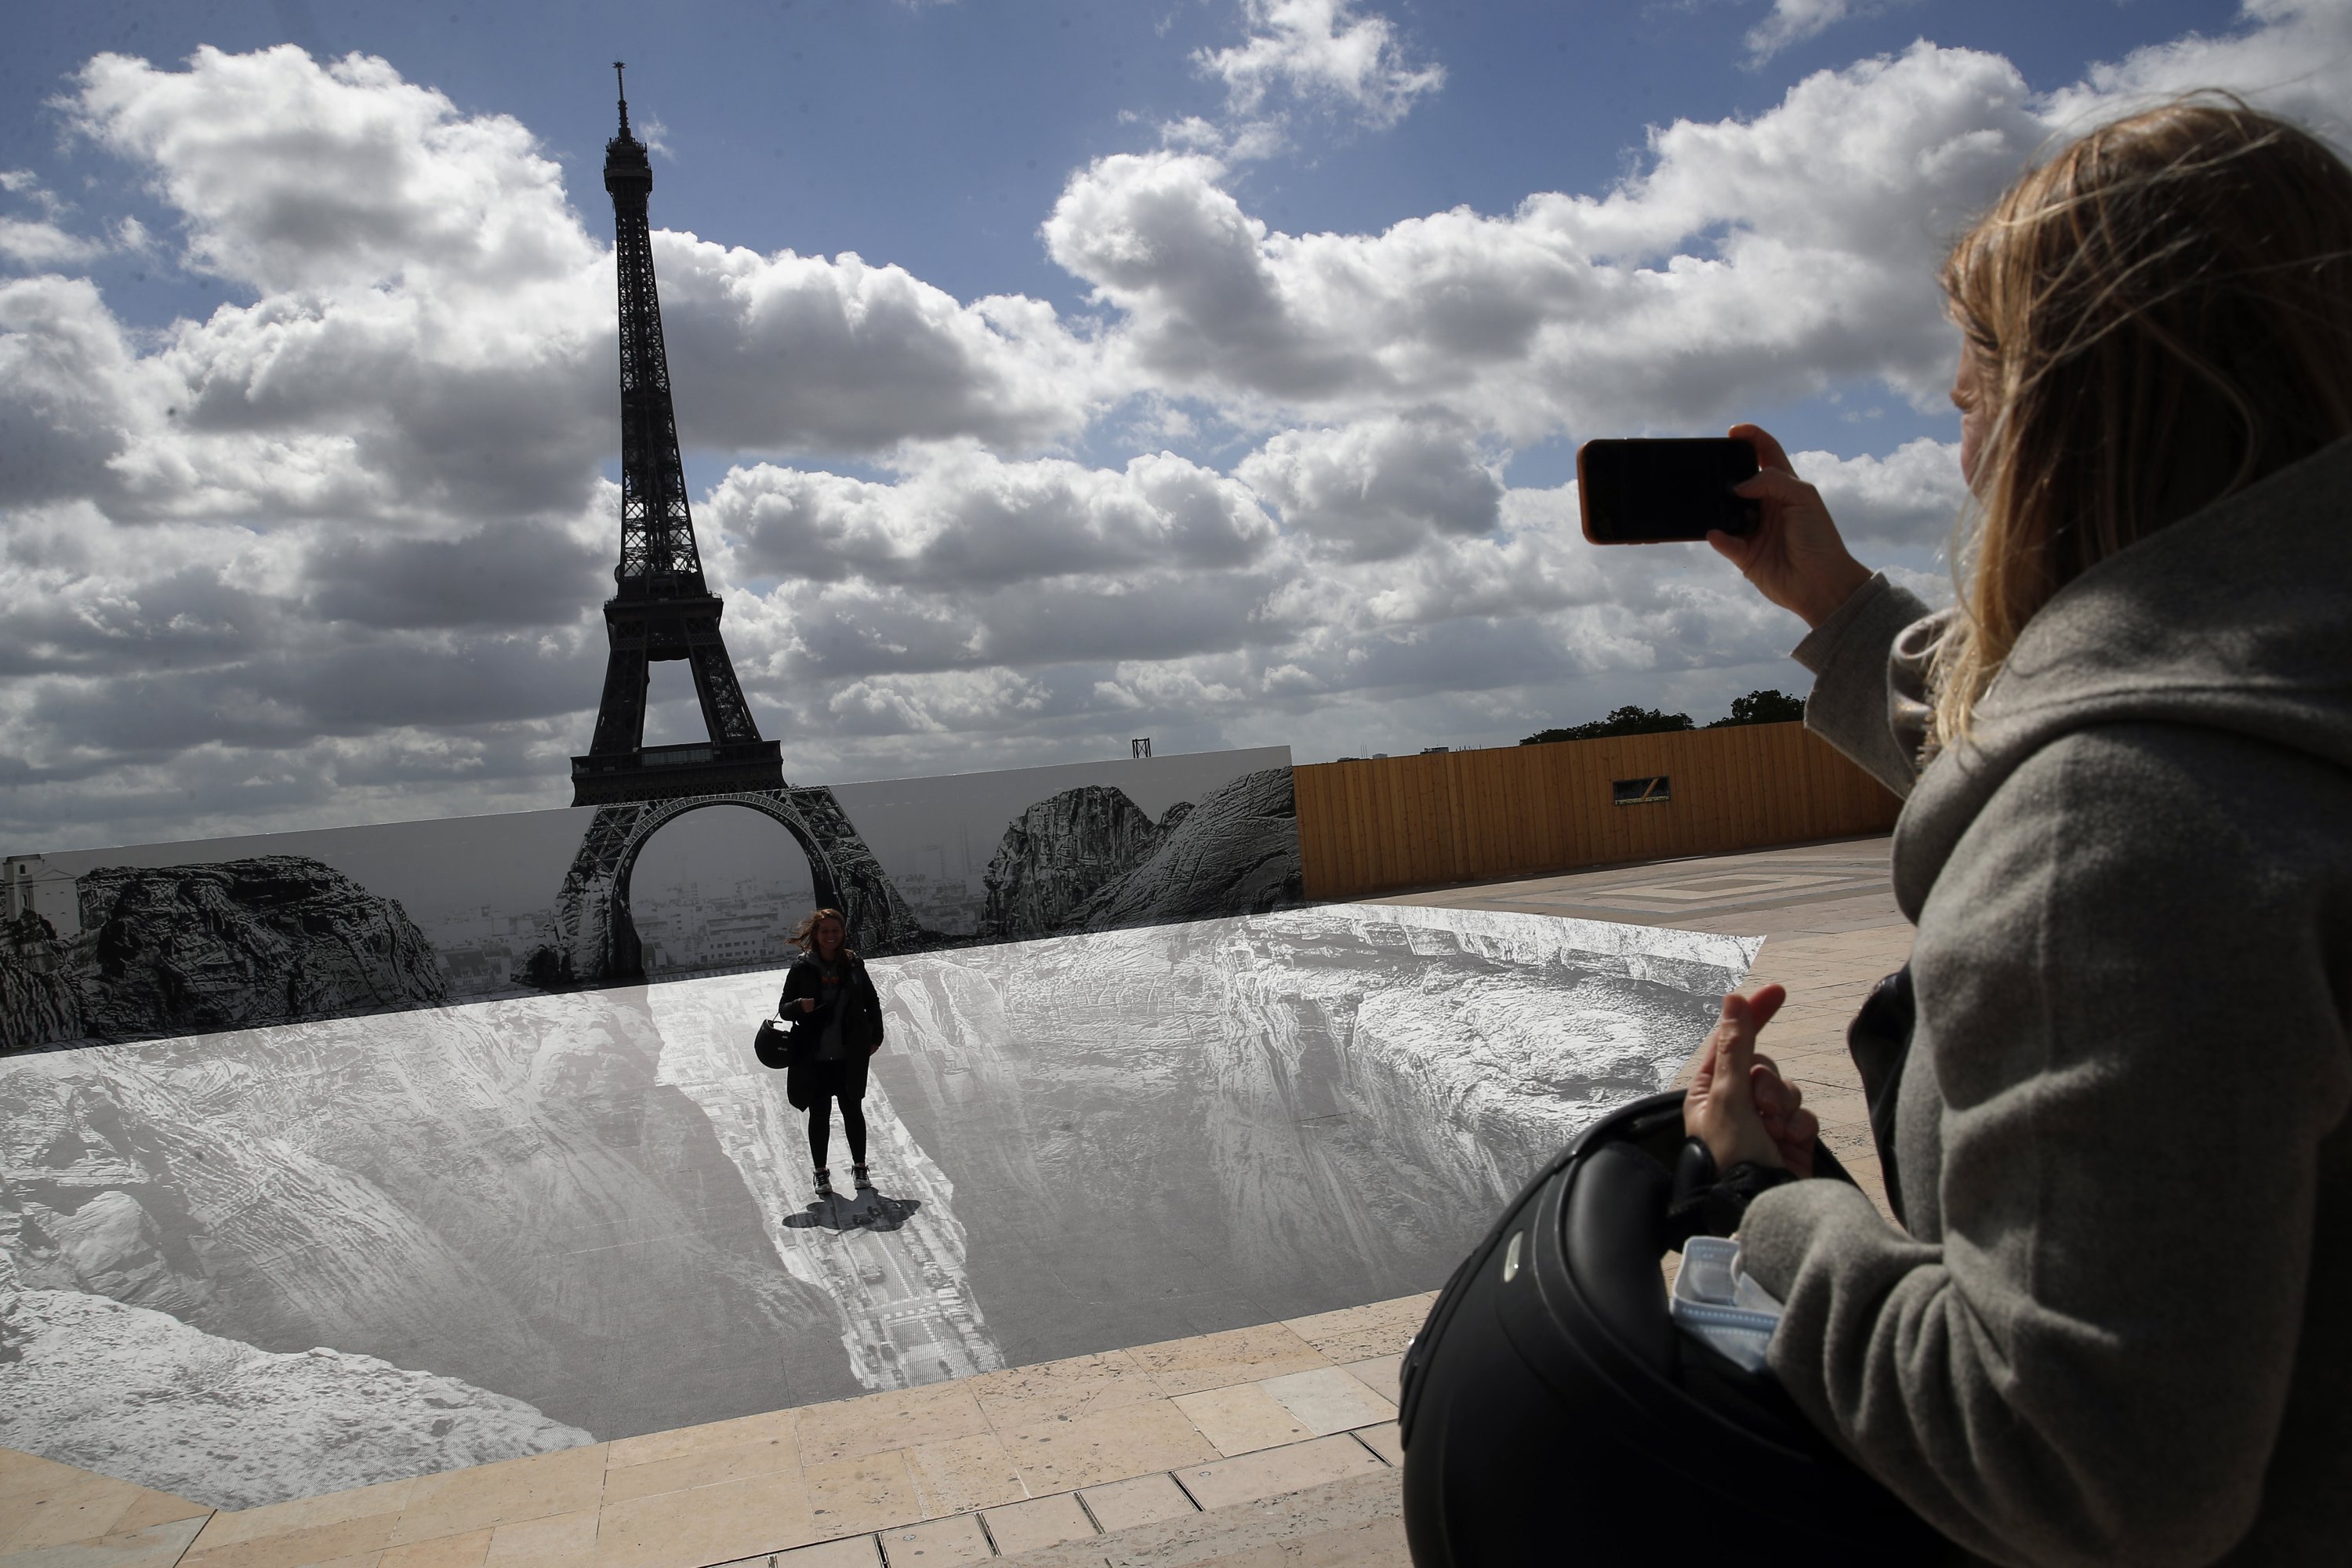 A woman takes a photo of her friend on the Trocadero square in front of the Eiffel Tower where French artist and photographer JR set his artwork, in Paris, France, May 21, 2021. (AP Photo)